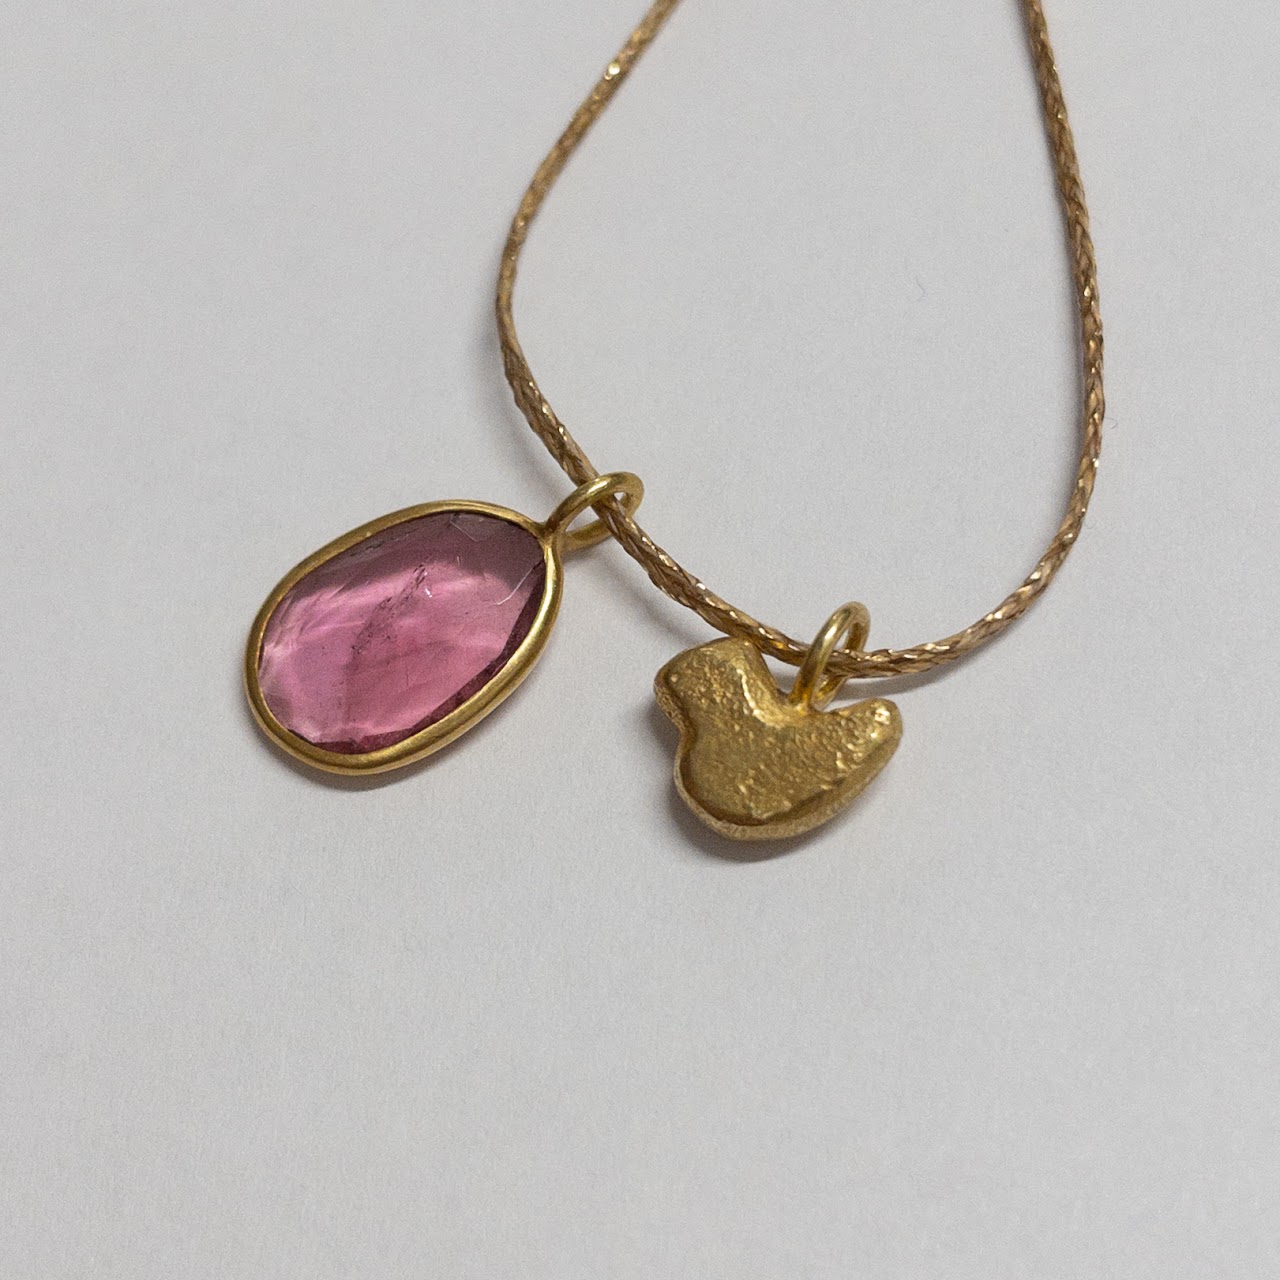 18K Gold, Rubellite, and Cord Pendant Necklace